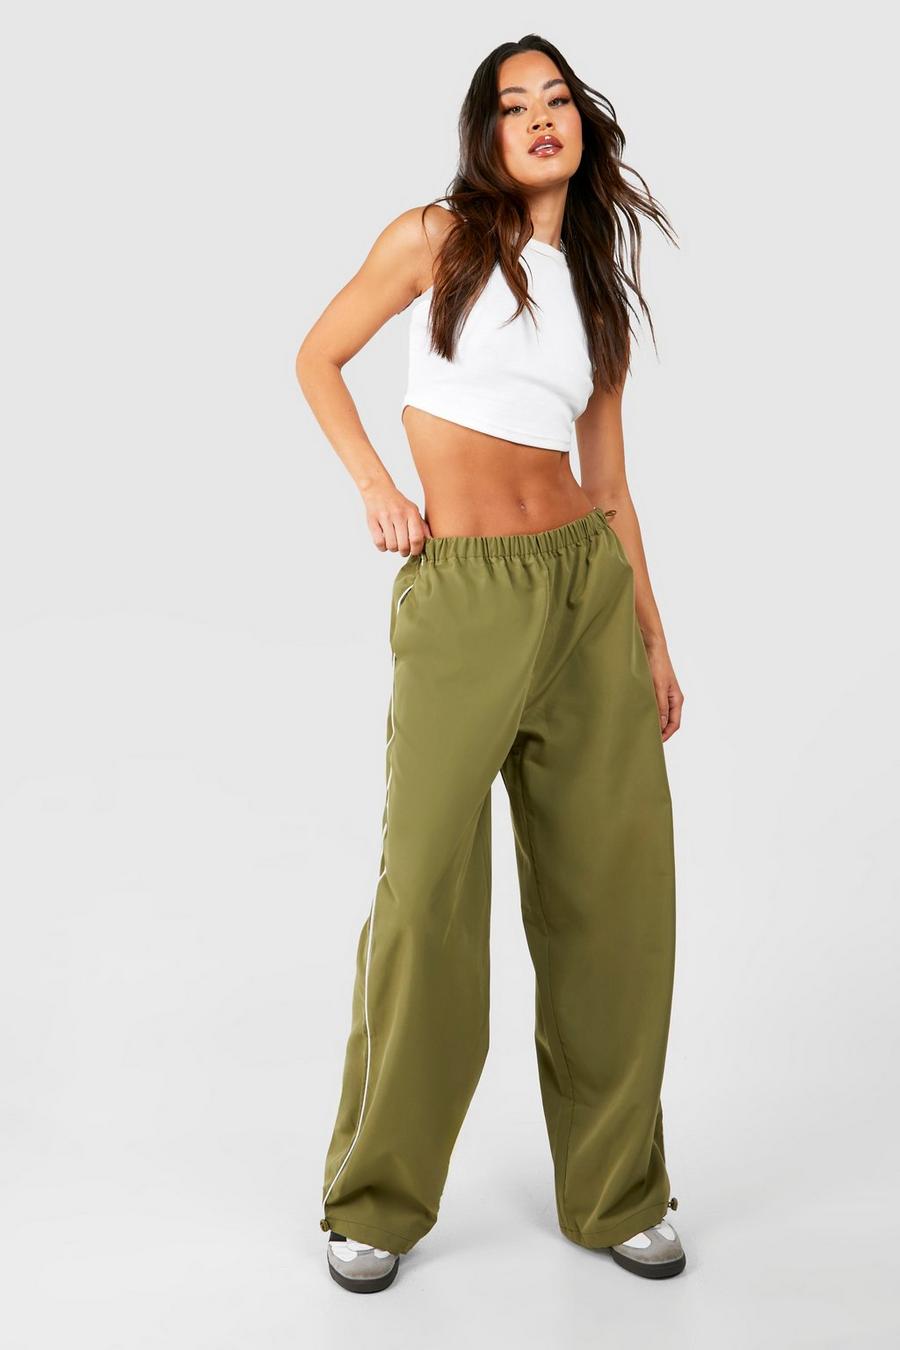 Khaki Tall Woven Elastic Waist Side Piping Track Pants image number 1